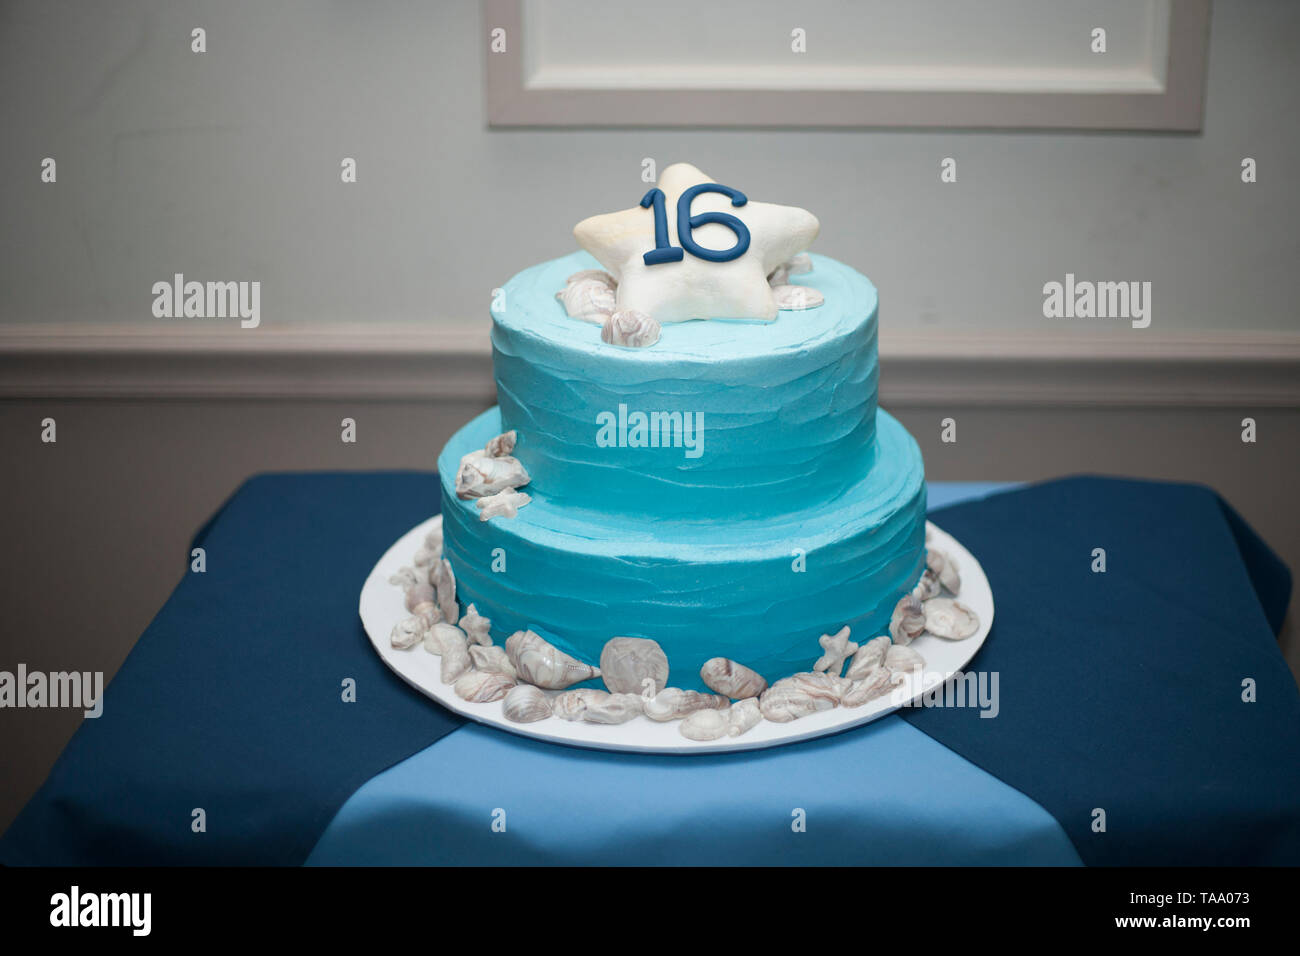 Sweet 16 Double-Tiered Birthday Cake with Light Blue Frosting Stock Photo